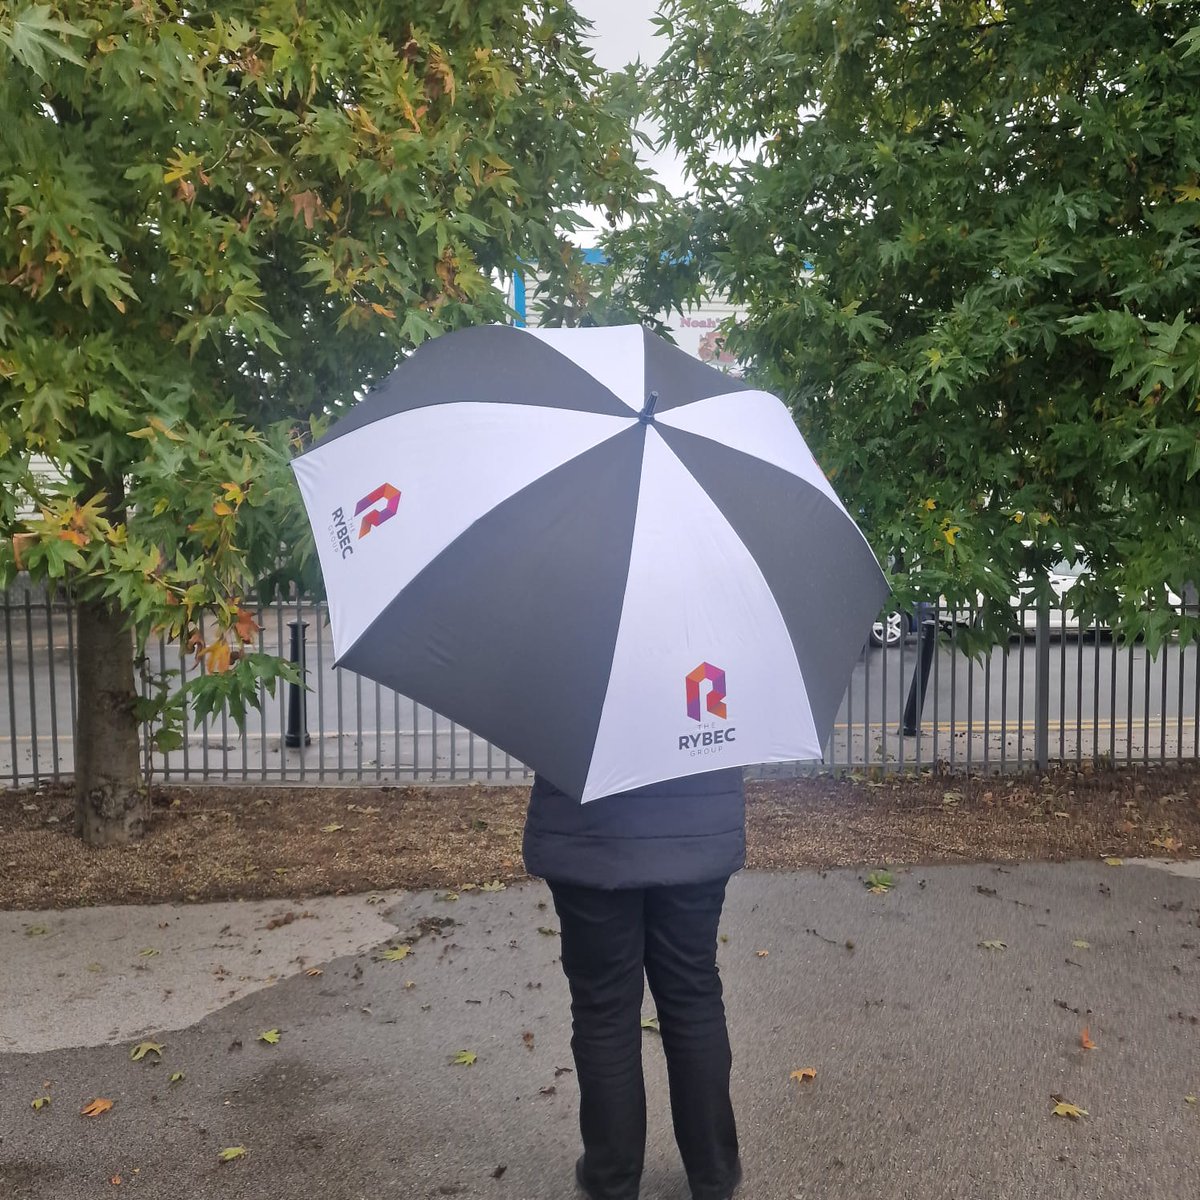 The UK weather may be unpredictable, just like cyber security threats. 

For a limited time, we're giving away a free branded umbrella to every new client. Connect with us today.
contact@rybec.co.uk

#CyberSecurity #ProtectYourBusiness #RainyUK #UmbrellaSecurity